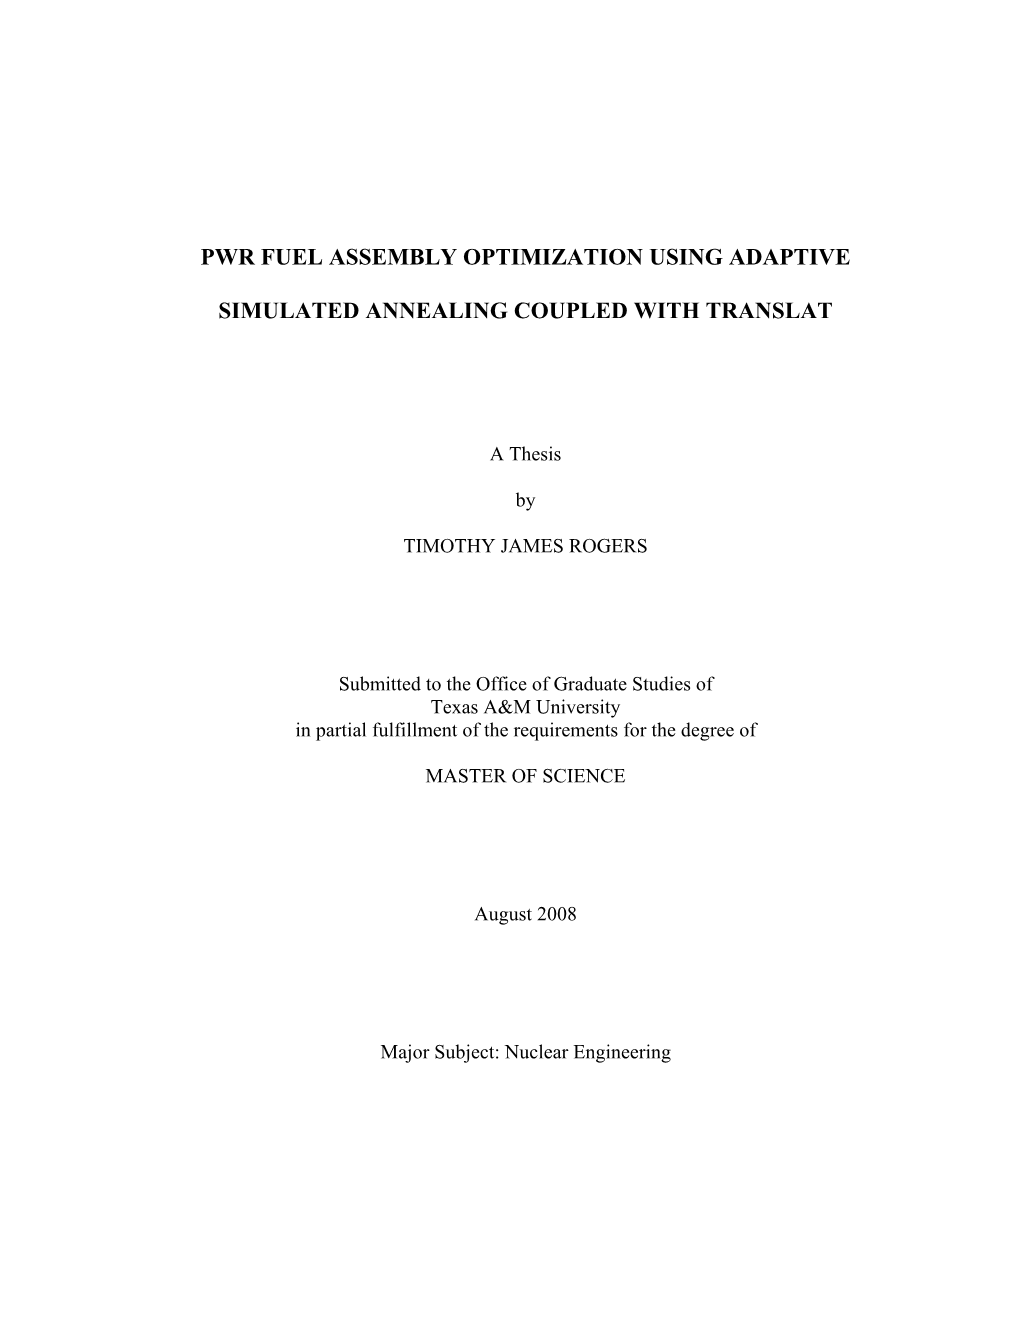 PWR Fuel Assembly Optimization Using Adaptive Simulated Annealing